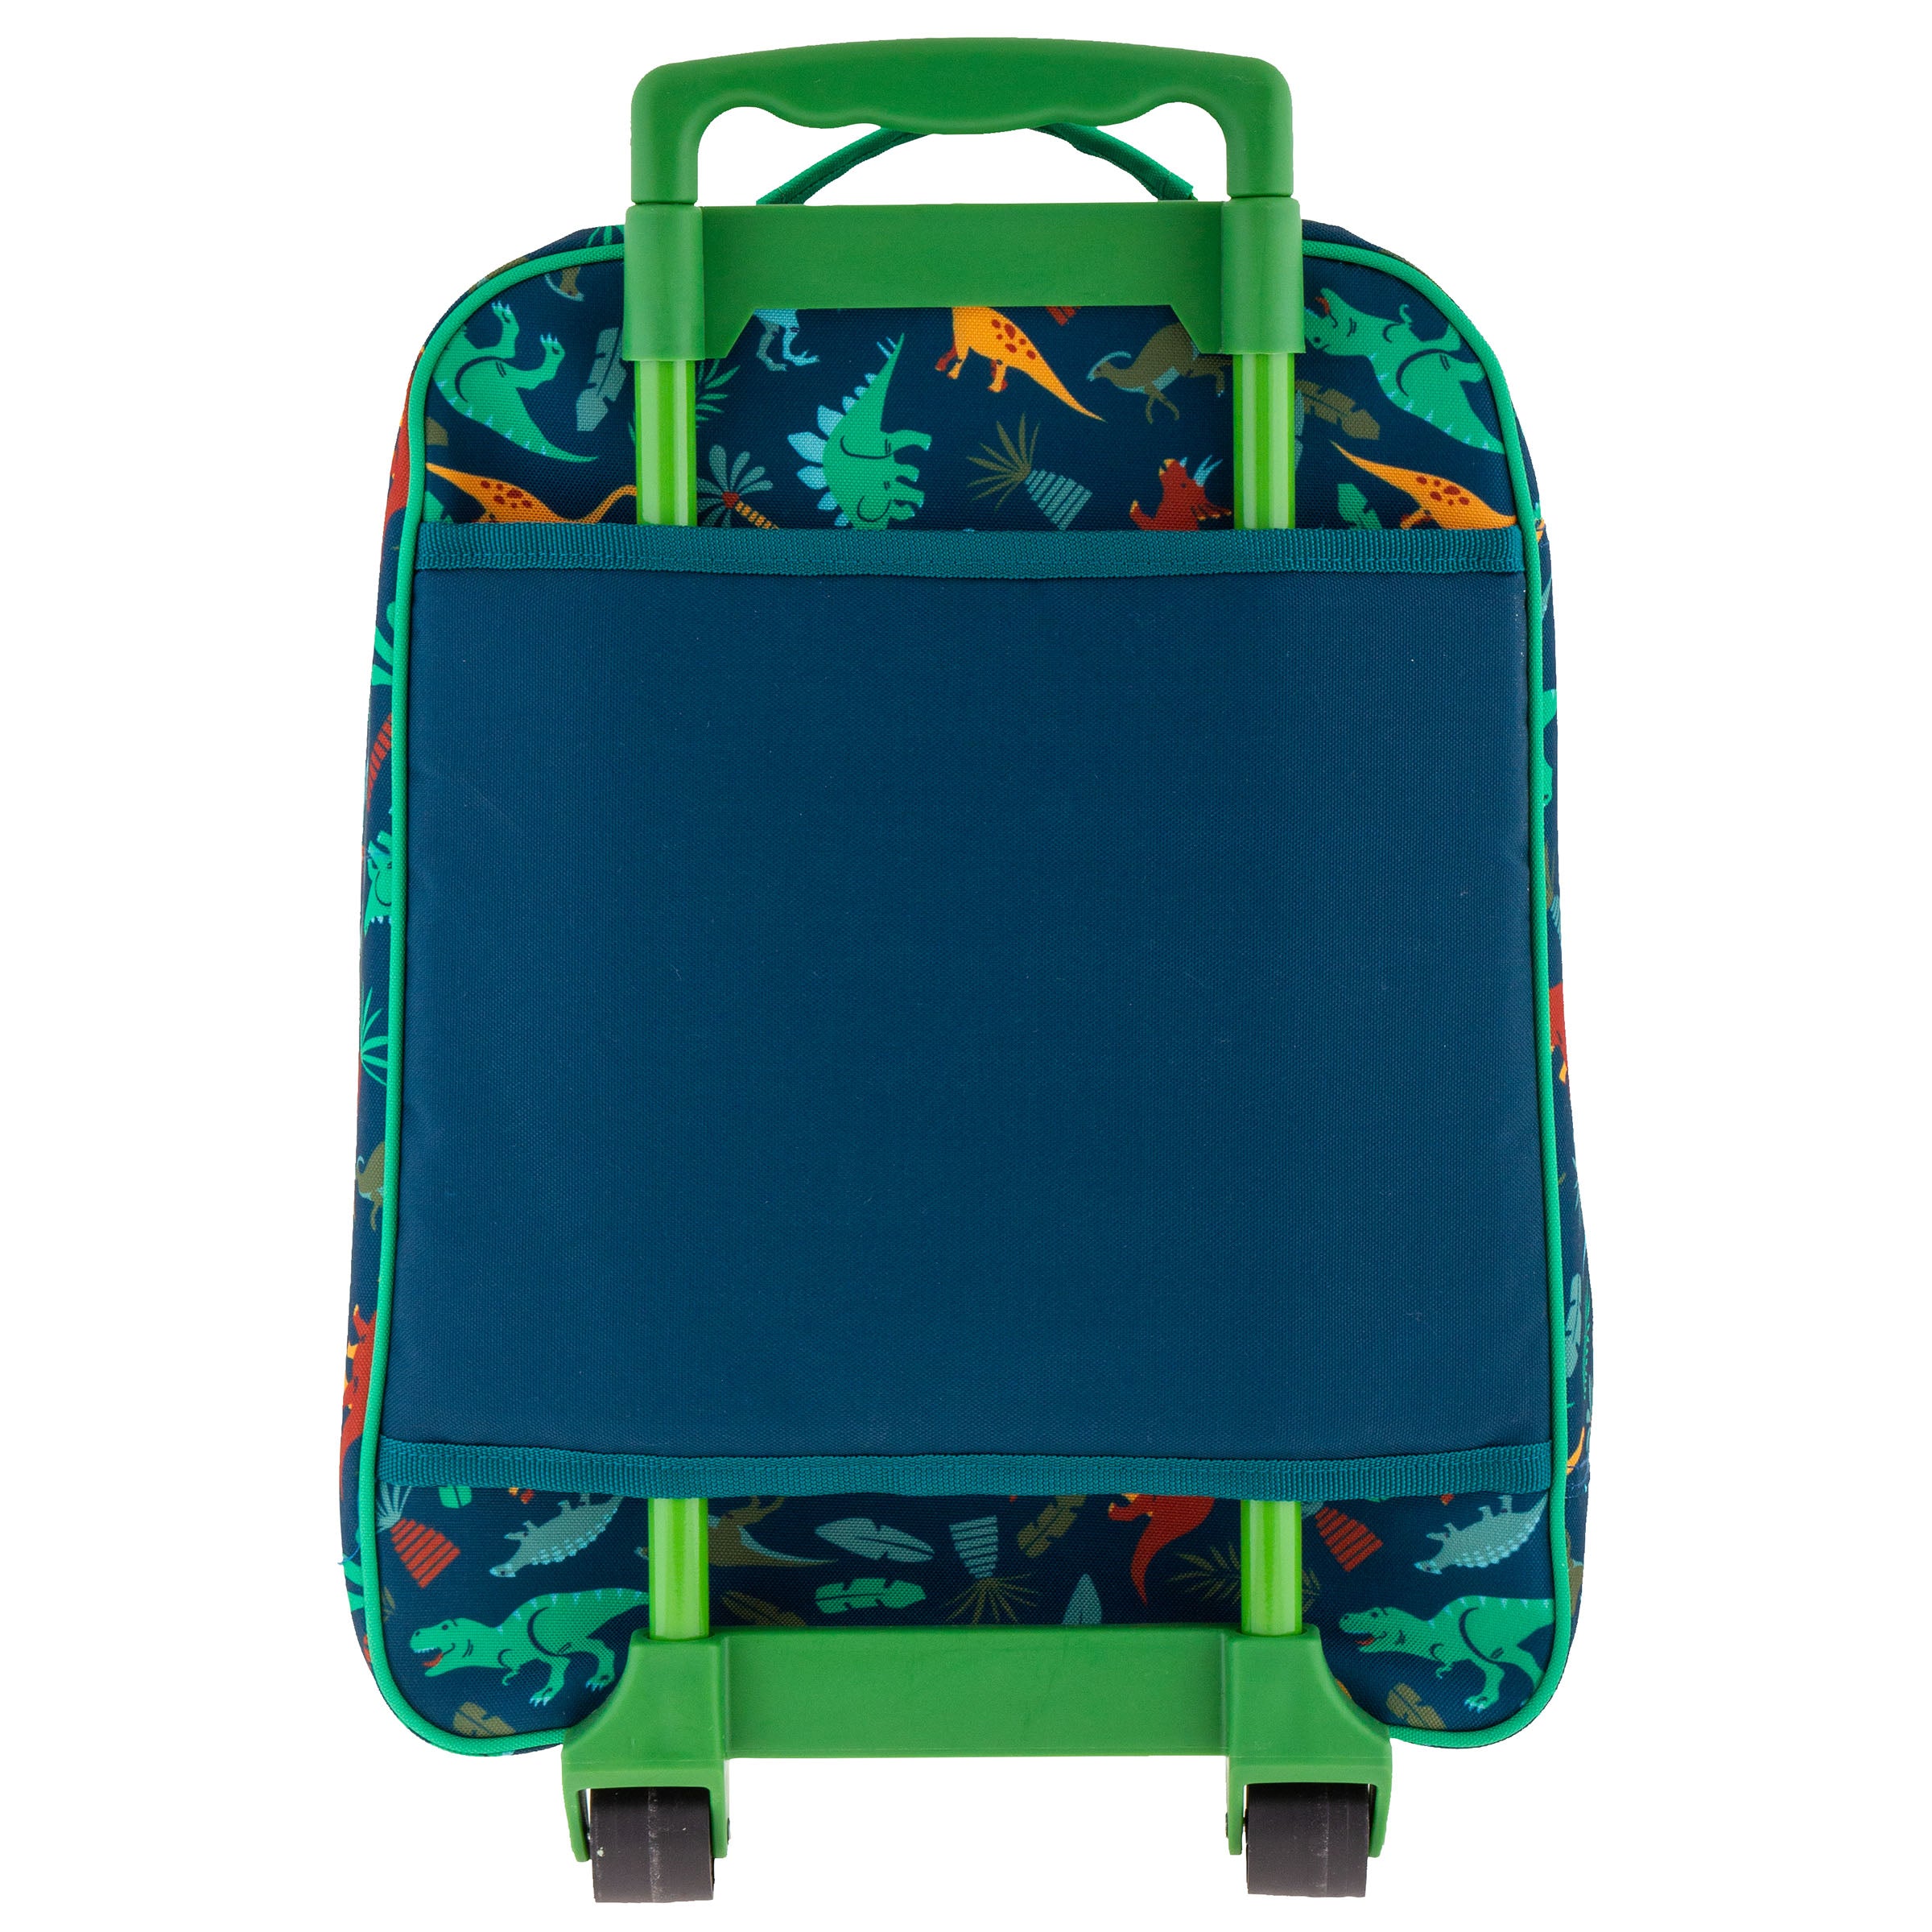 Shark Personalized Kids Rolling Luggage by Stephen Joseph